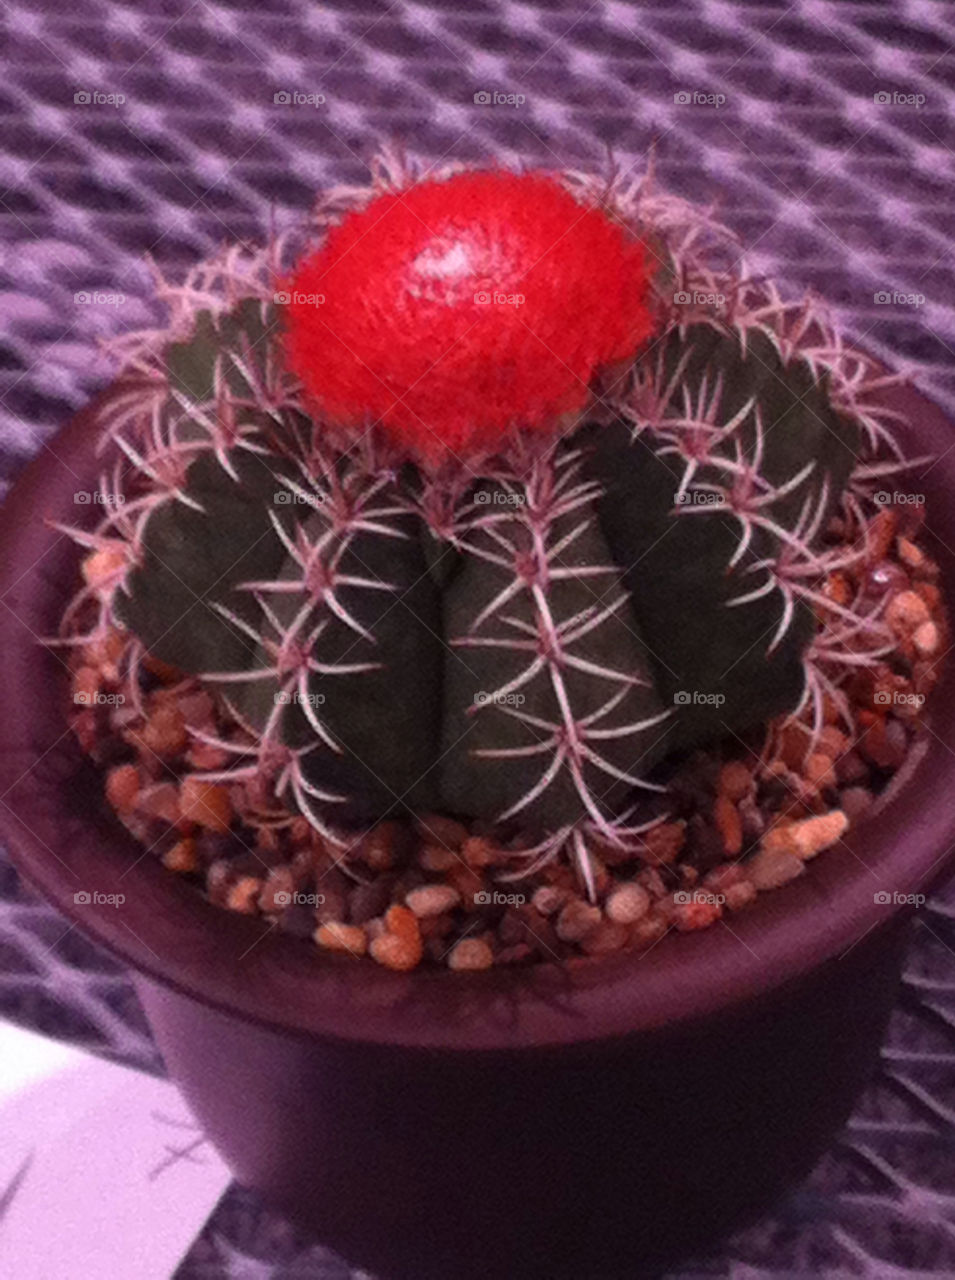 Blooming Catus plant